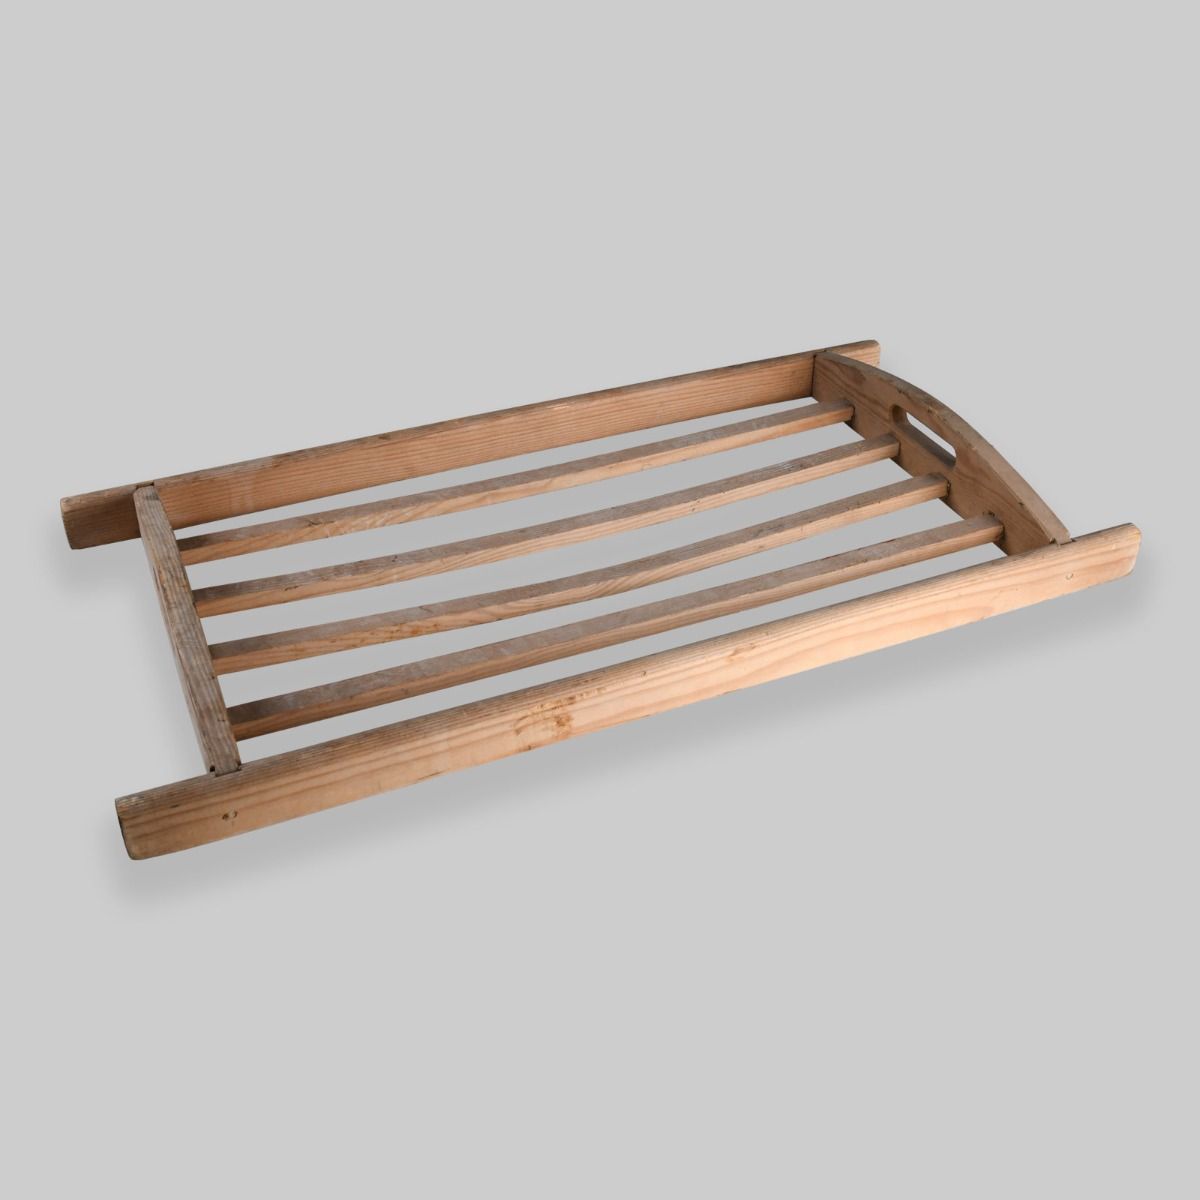 Vintage Wooden Tray Rack